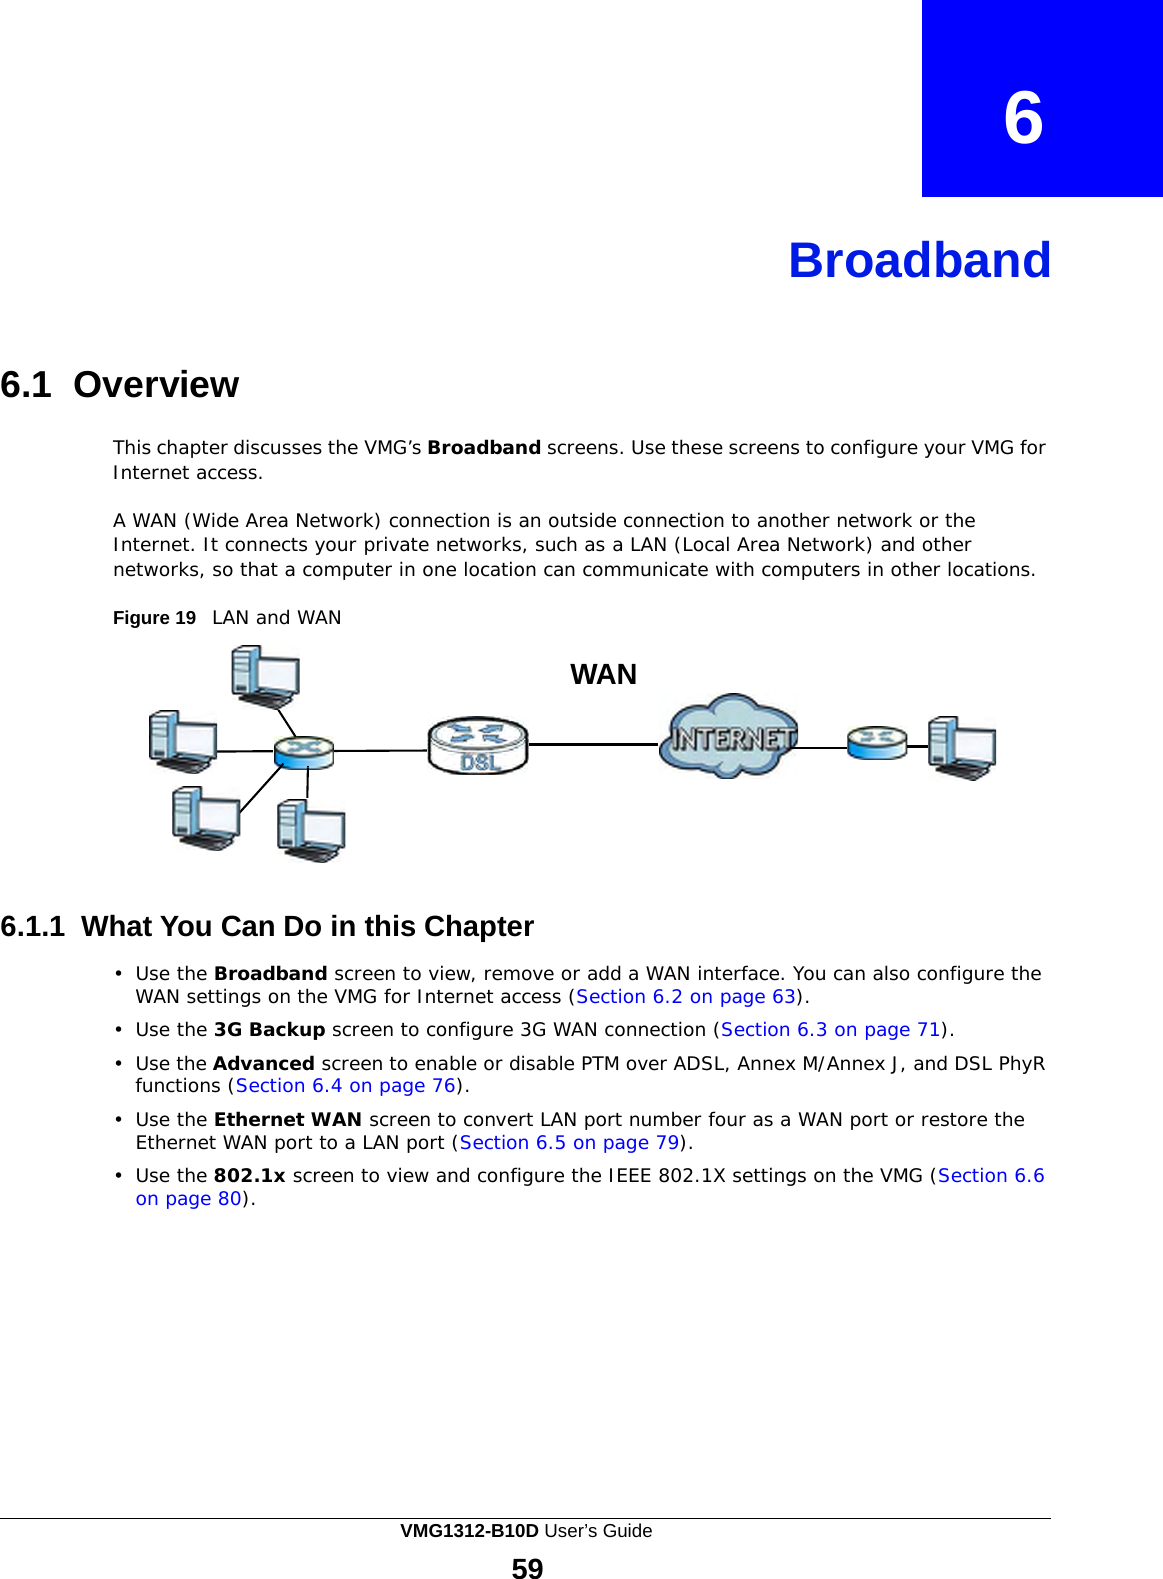                    6    Broadband     6.1  Overview  This chapter discusses the VMG’s Broadband screens. Use these screens to configure your VMG for Internet access.  A WAN (Wide Area Network) connection is an outside connection to another network or the Internet. It connects your private networks, such as a LAN (Local Area Network) and other networks, so that a computer in one location can communicate with computers in other locations.  Figure 19   LAN and WAN  WAN           6.1.1  What You Can Do in this Chapter  •  Use the Broadband screen to view, remove or add a WAN interface. You can also configure the WAN settings on the VMG for Internet access (Section 6.2 on page 63).  •  Use the 3G Backup screen to configure 3G WAN connection (Section 6.3 on page 71).  •  Use the Advanced screen to enable or disable PTM over ADSL, Annex M/Annex J, and DSL PhyR functions (Section 6.4 on page 76).  •  Use the Ethernet WAN screen to convert LAN port number four as a WAN port or restore the Ethernet WAN port to a LAN port (Section 6.5 on page 79).  •  Use the 802.1x screen to view and configure the IEEE 802.1X settings on the VMG (Section 6.6 on page 80). VMG1312-B10D User’s Guide 59  